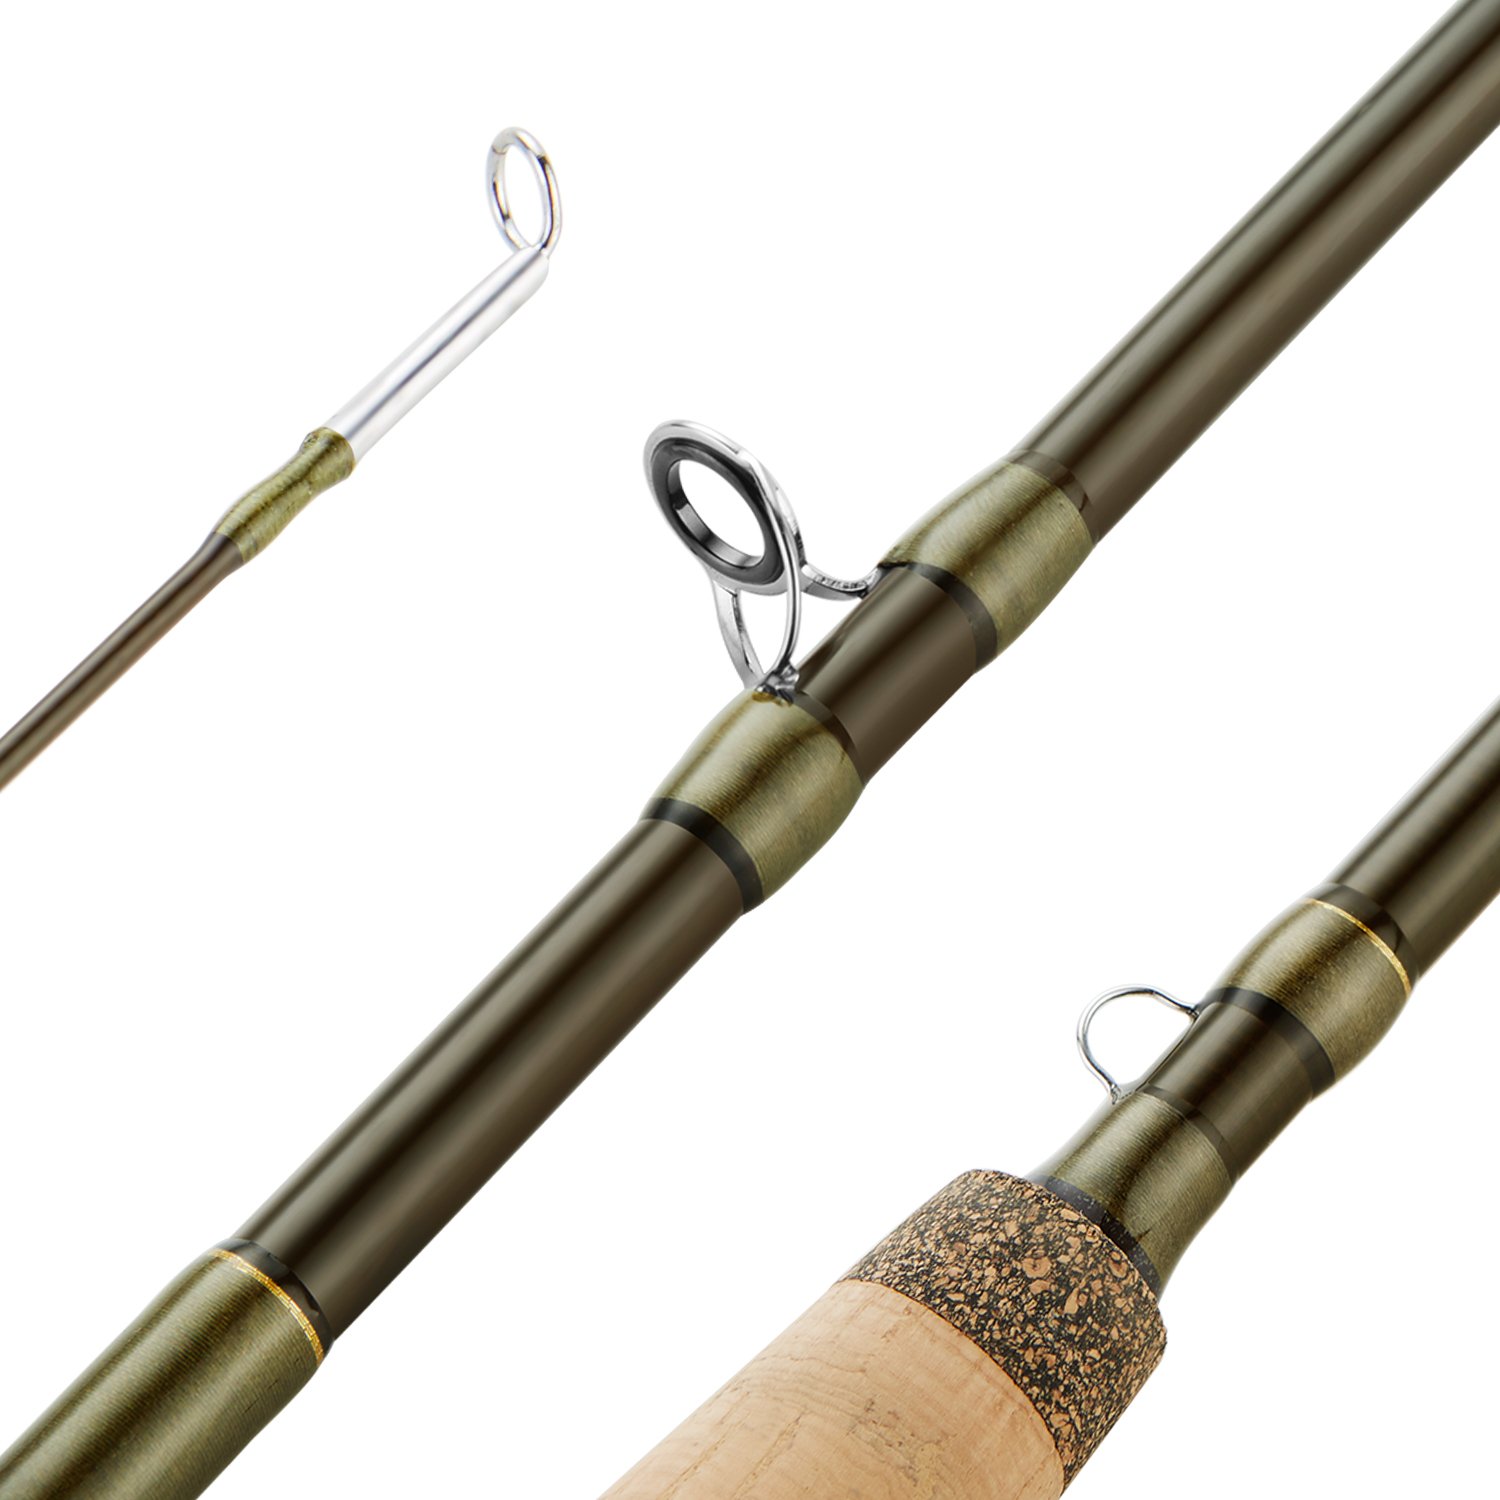 Top 10 Best Fly Fishing Rods (Reviews & Guide) Fishing Tool Reviewer